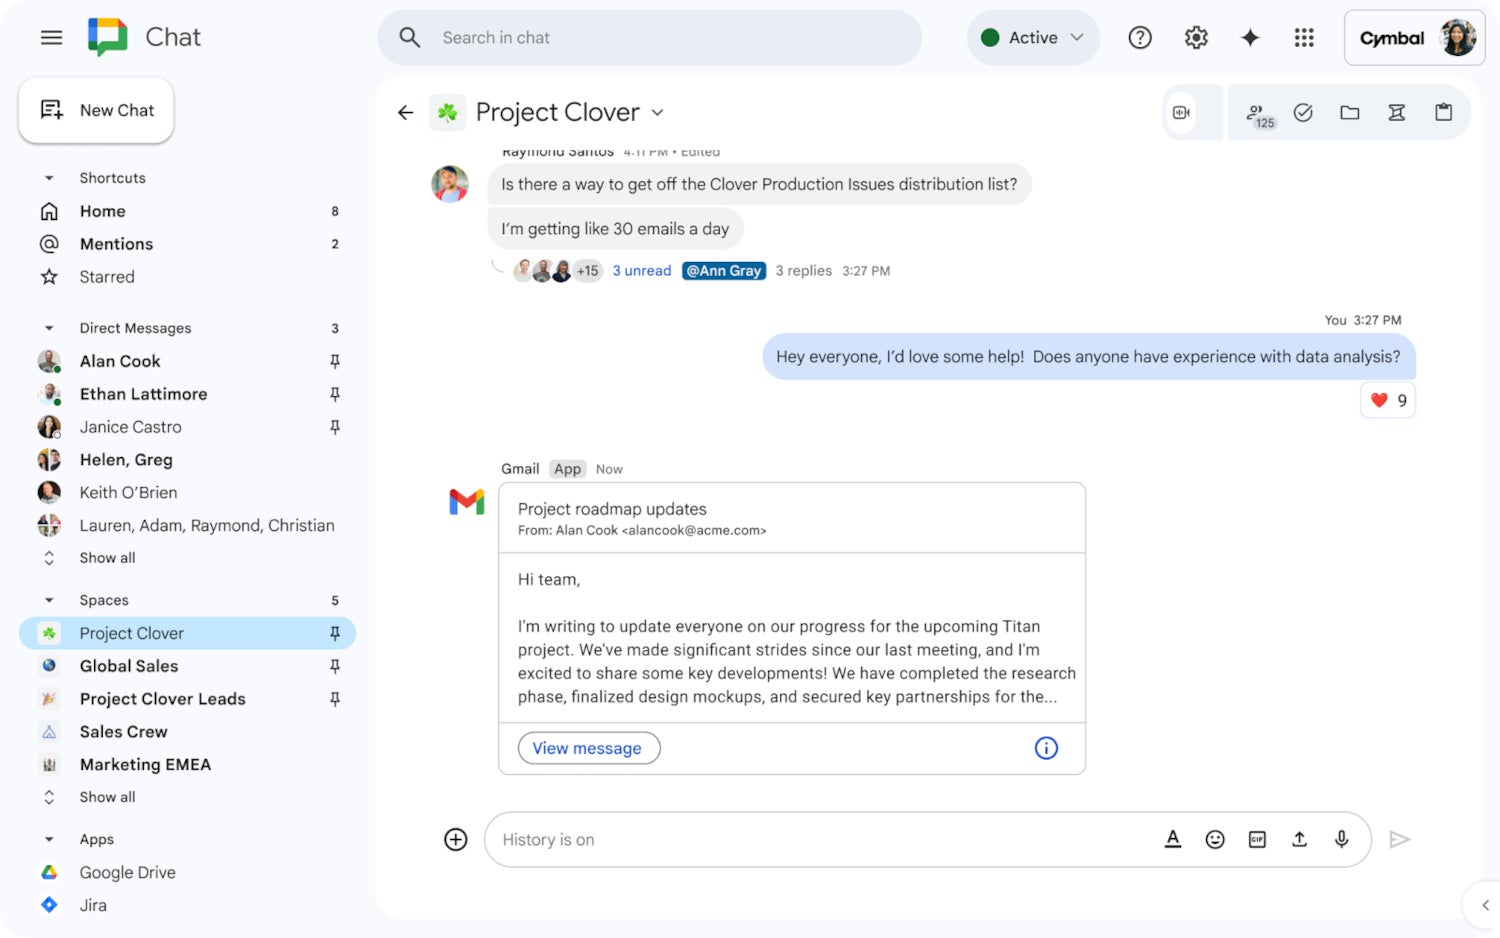 Email card in the space - Google Chat rolls out a new way to manage emails